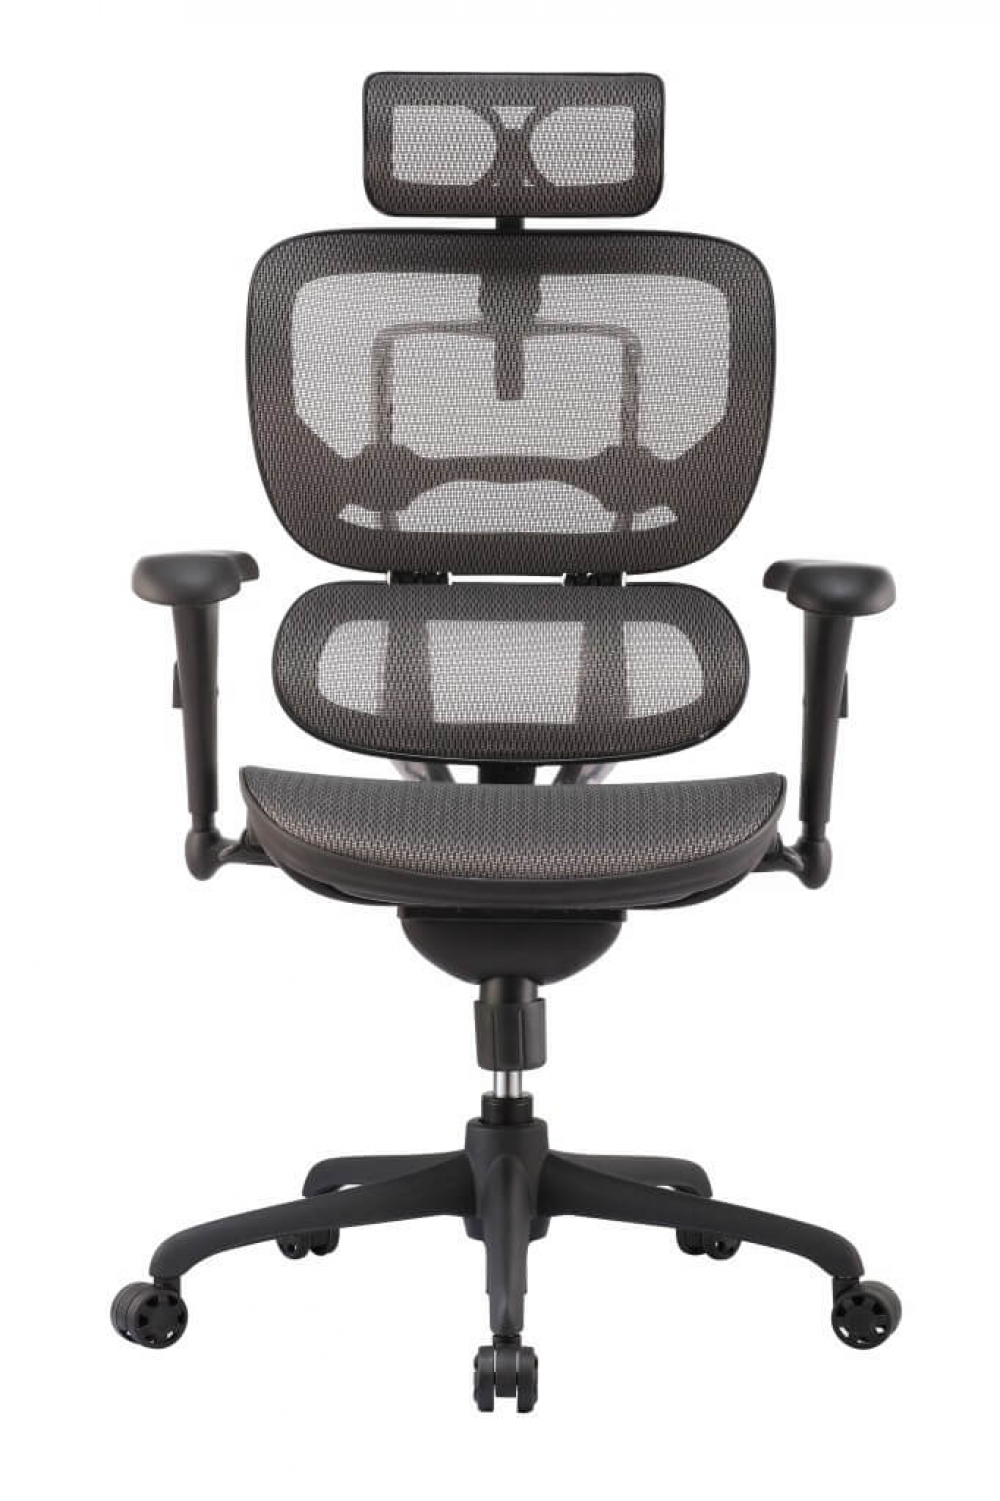 High back office chairs front view